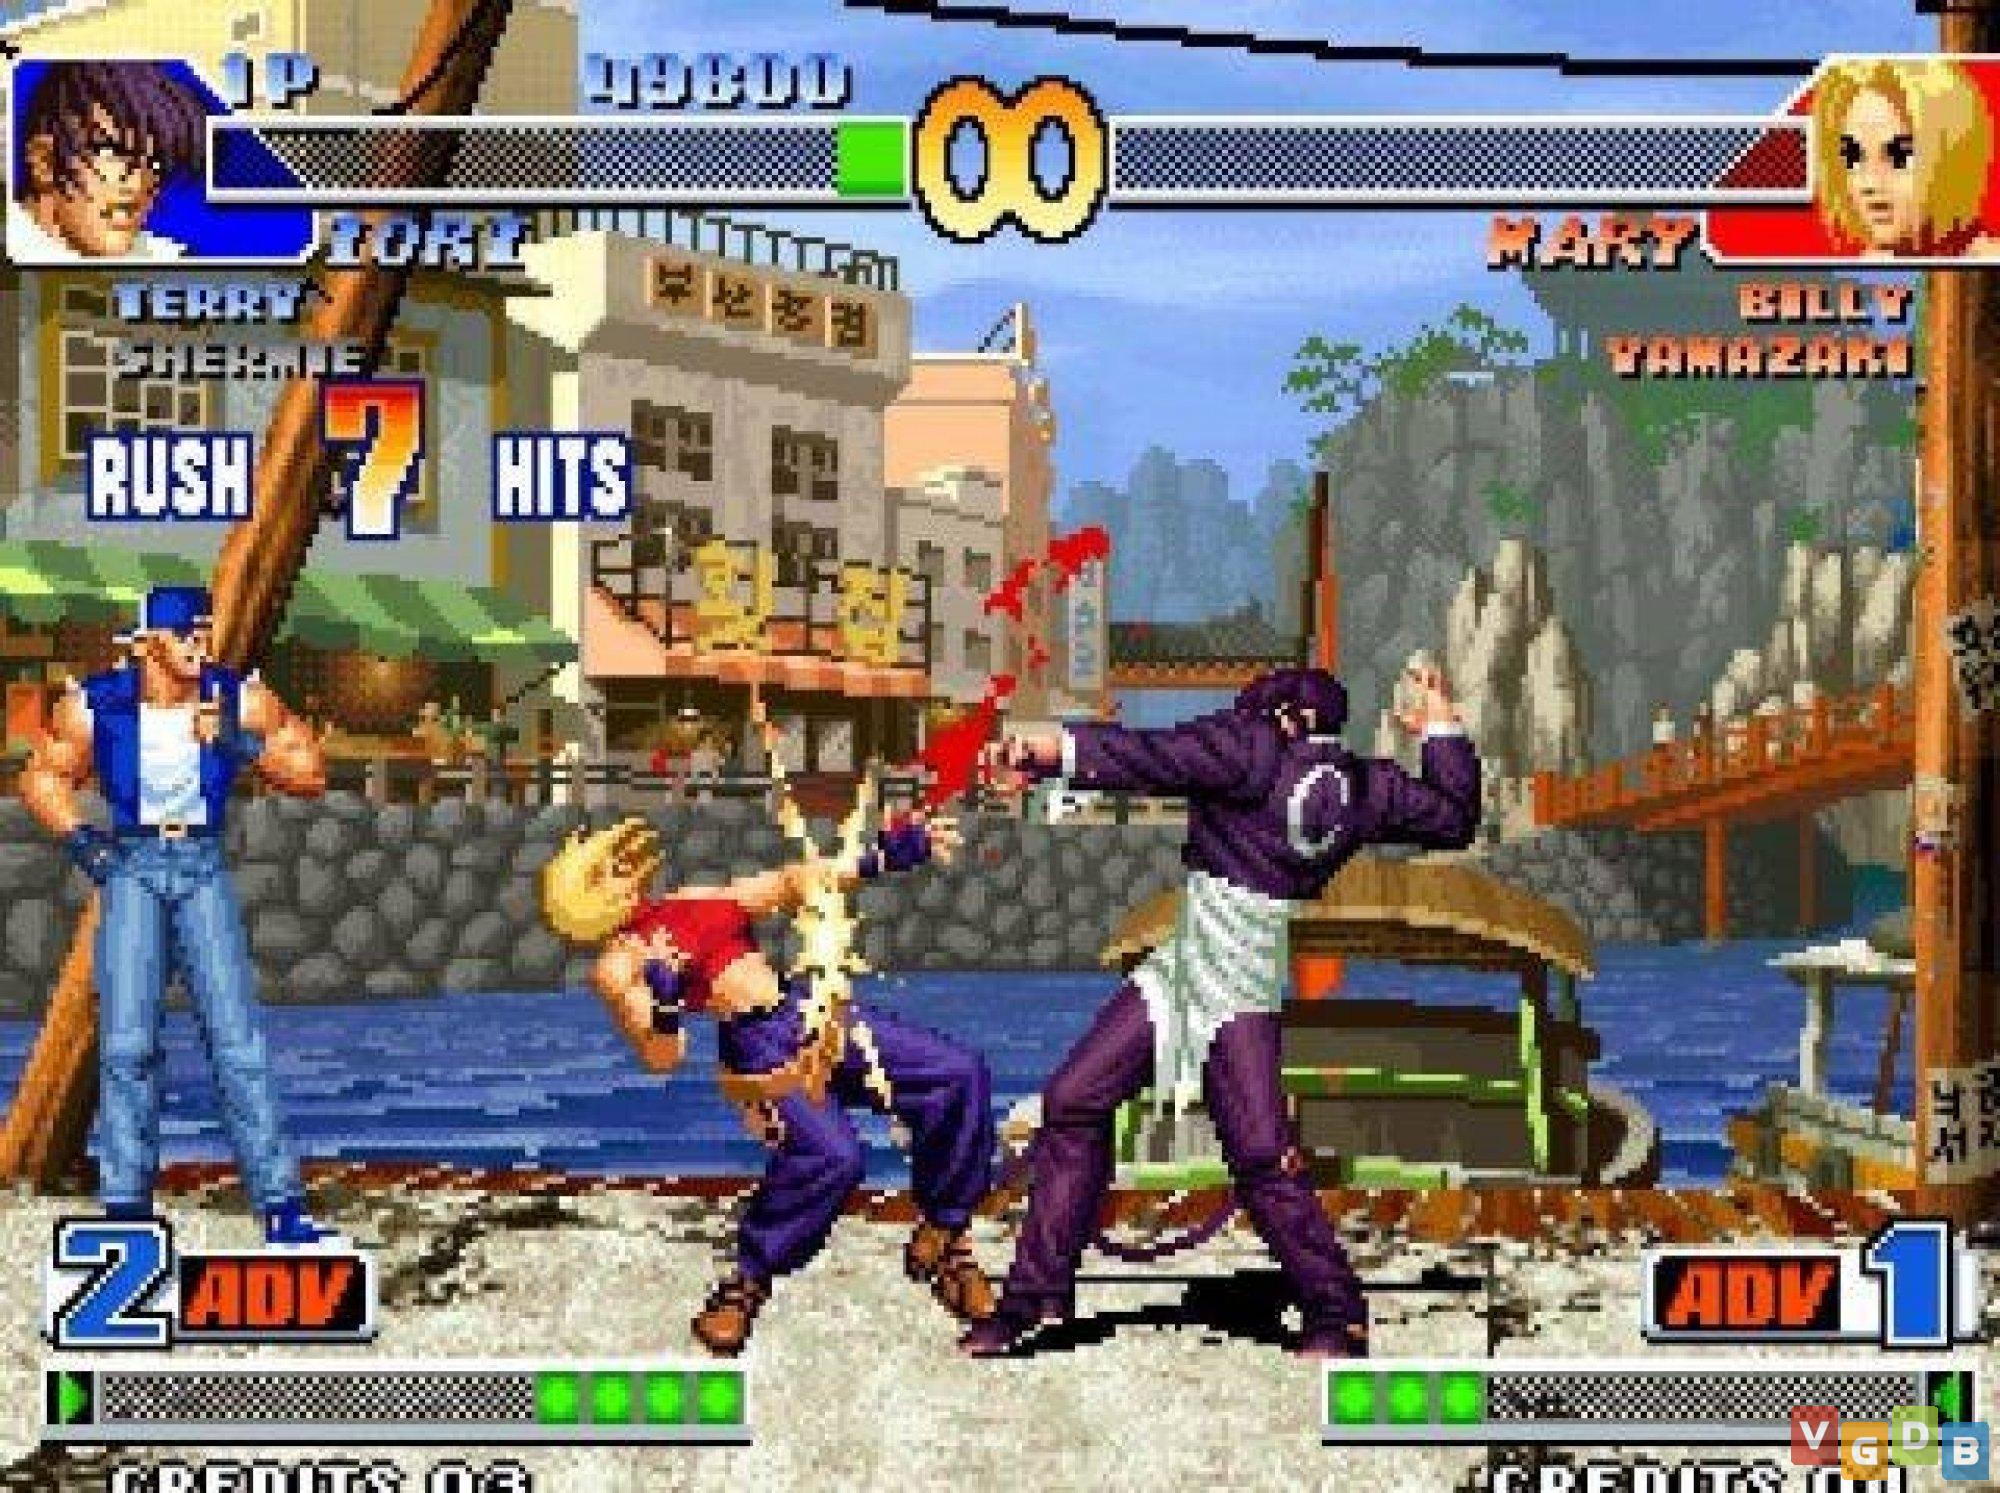 the king of fighters 98 the slugfest